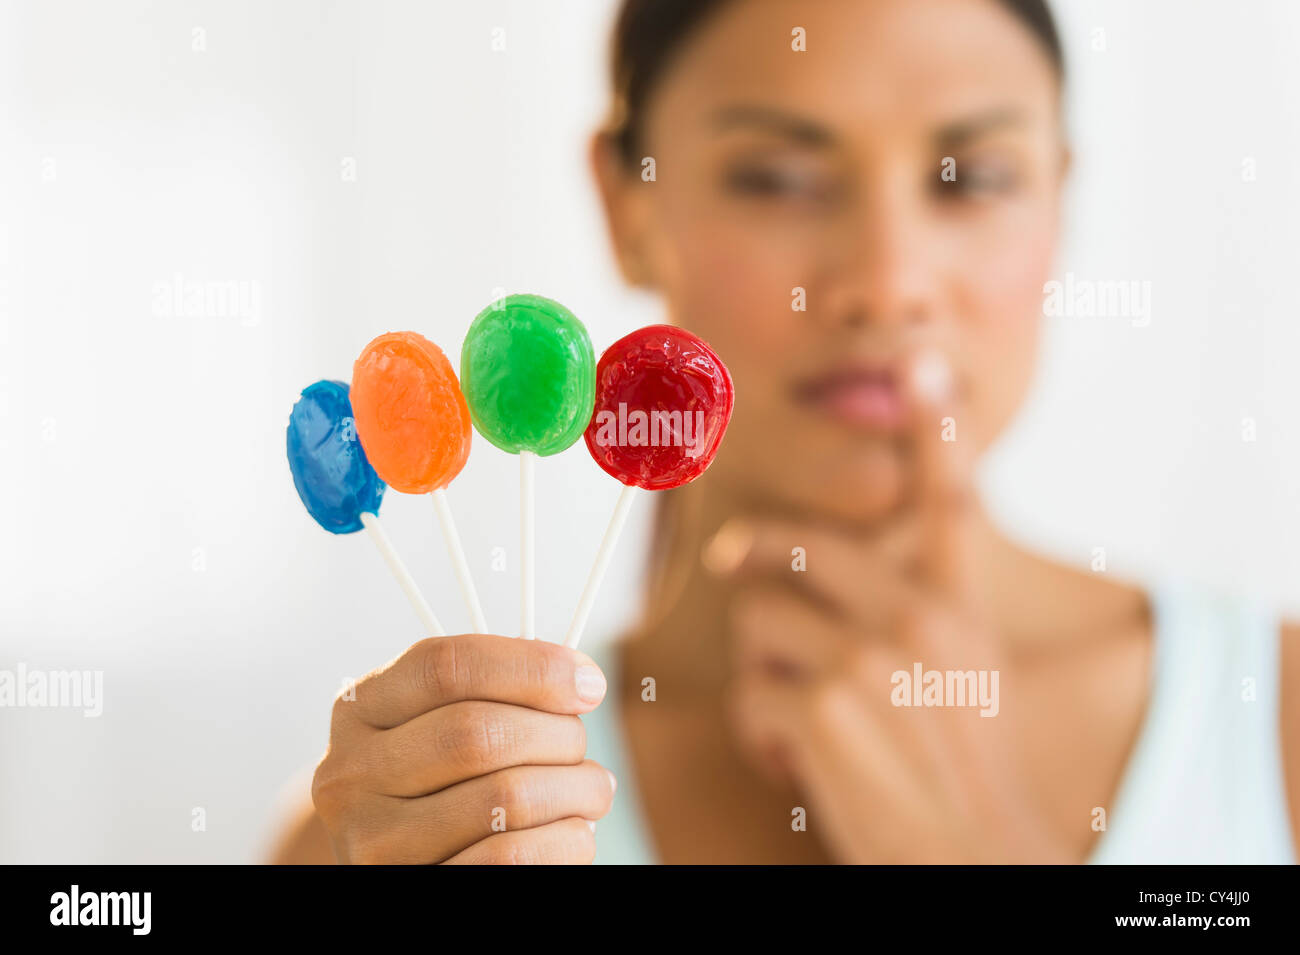 Woman holding colorful lollypops Stock Photo